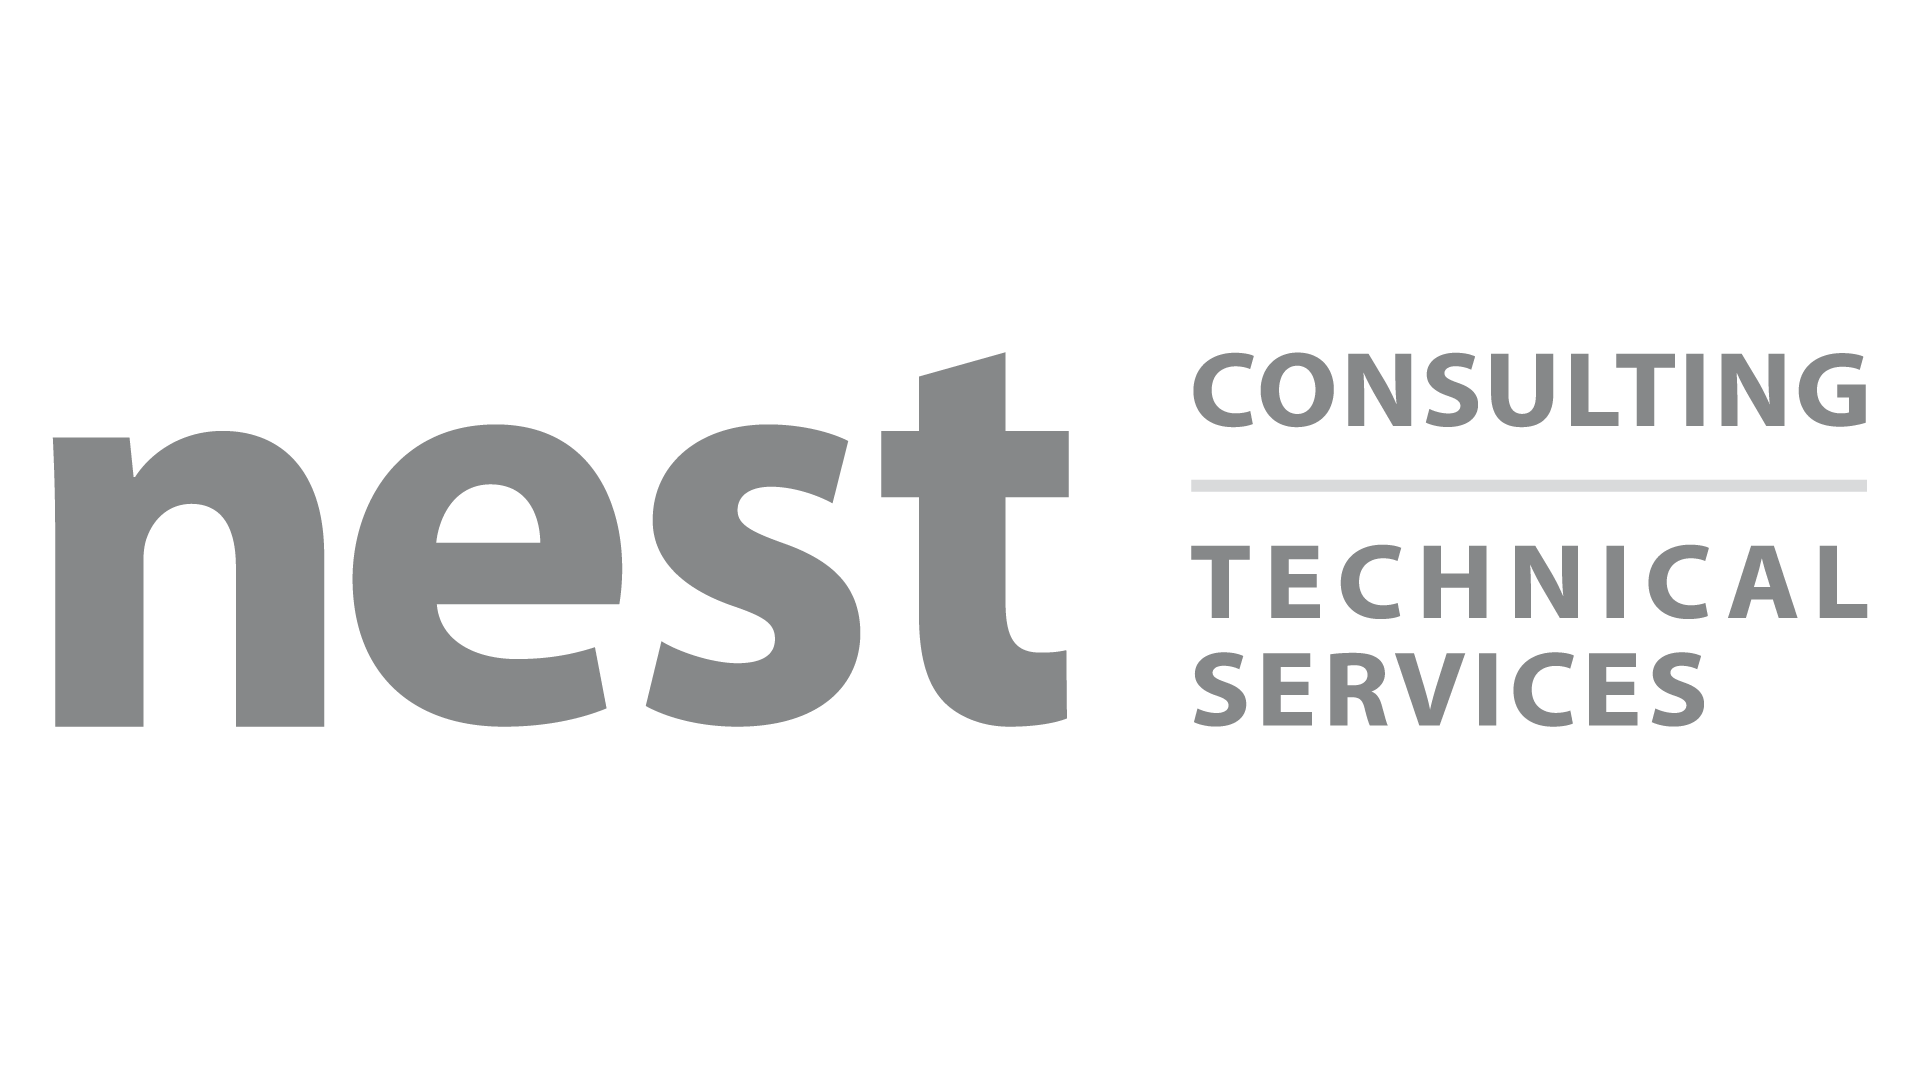 nestCONSULTING &TECHNICALSERVICES.png